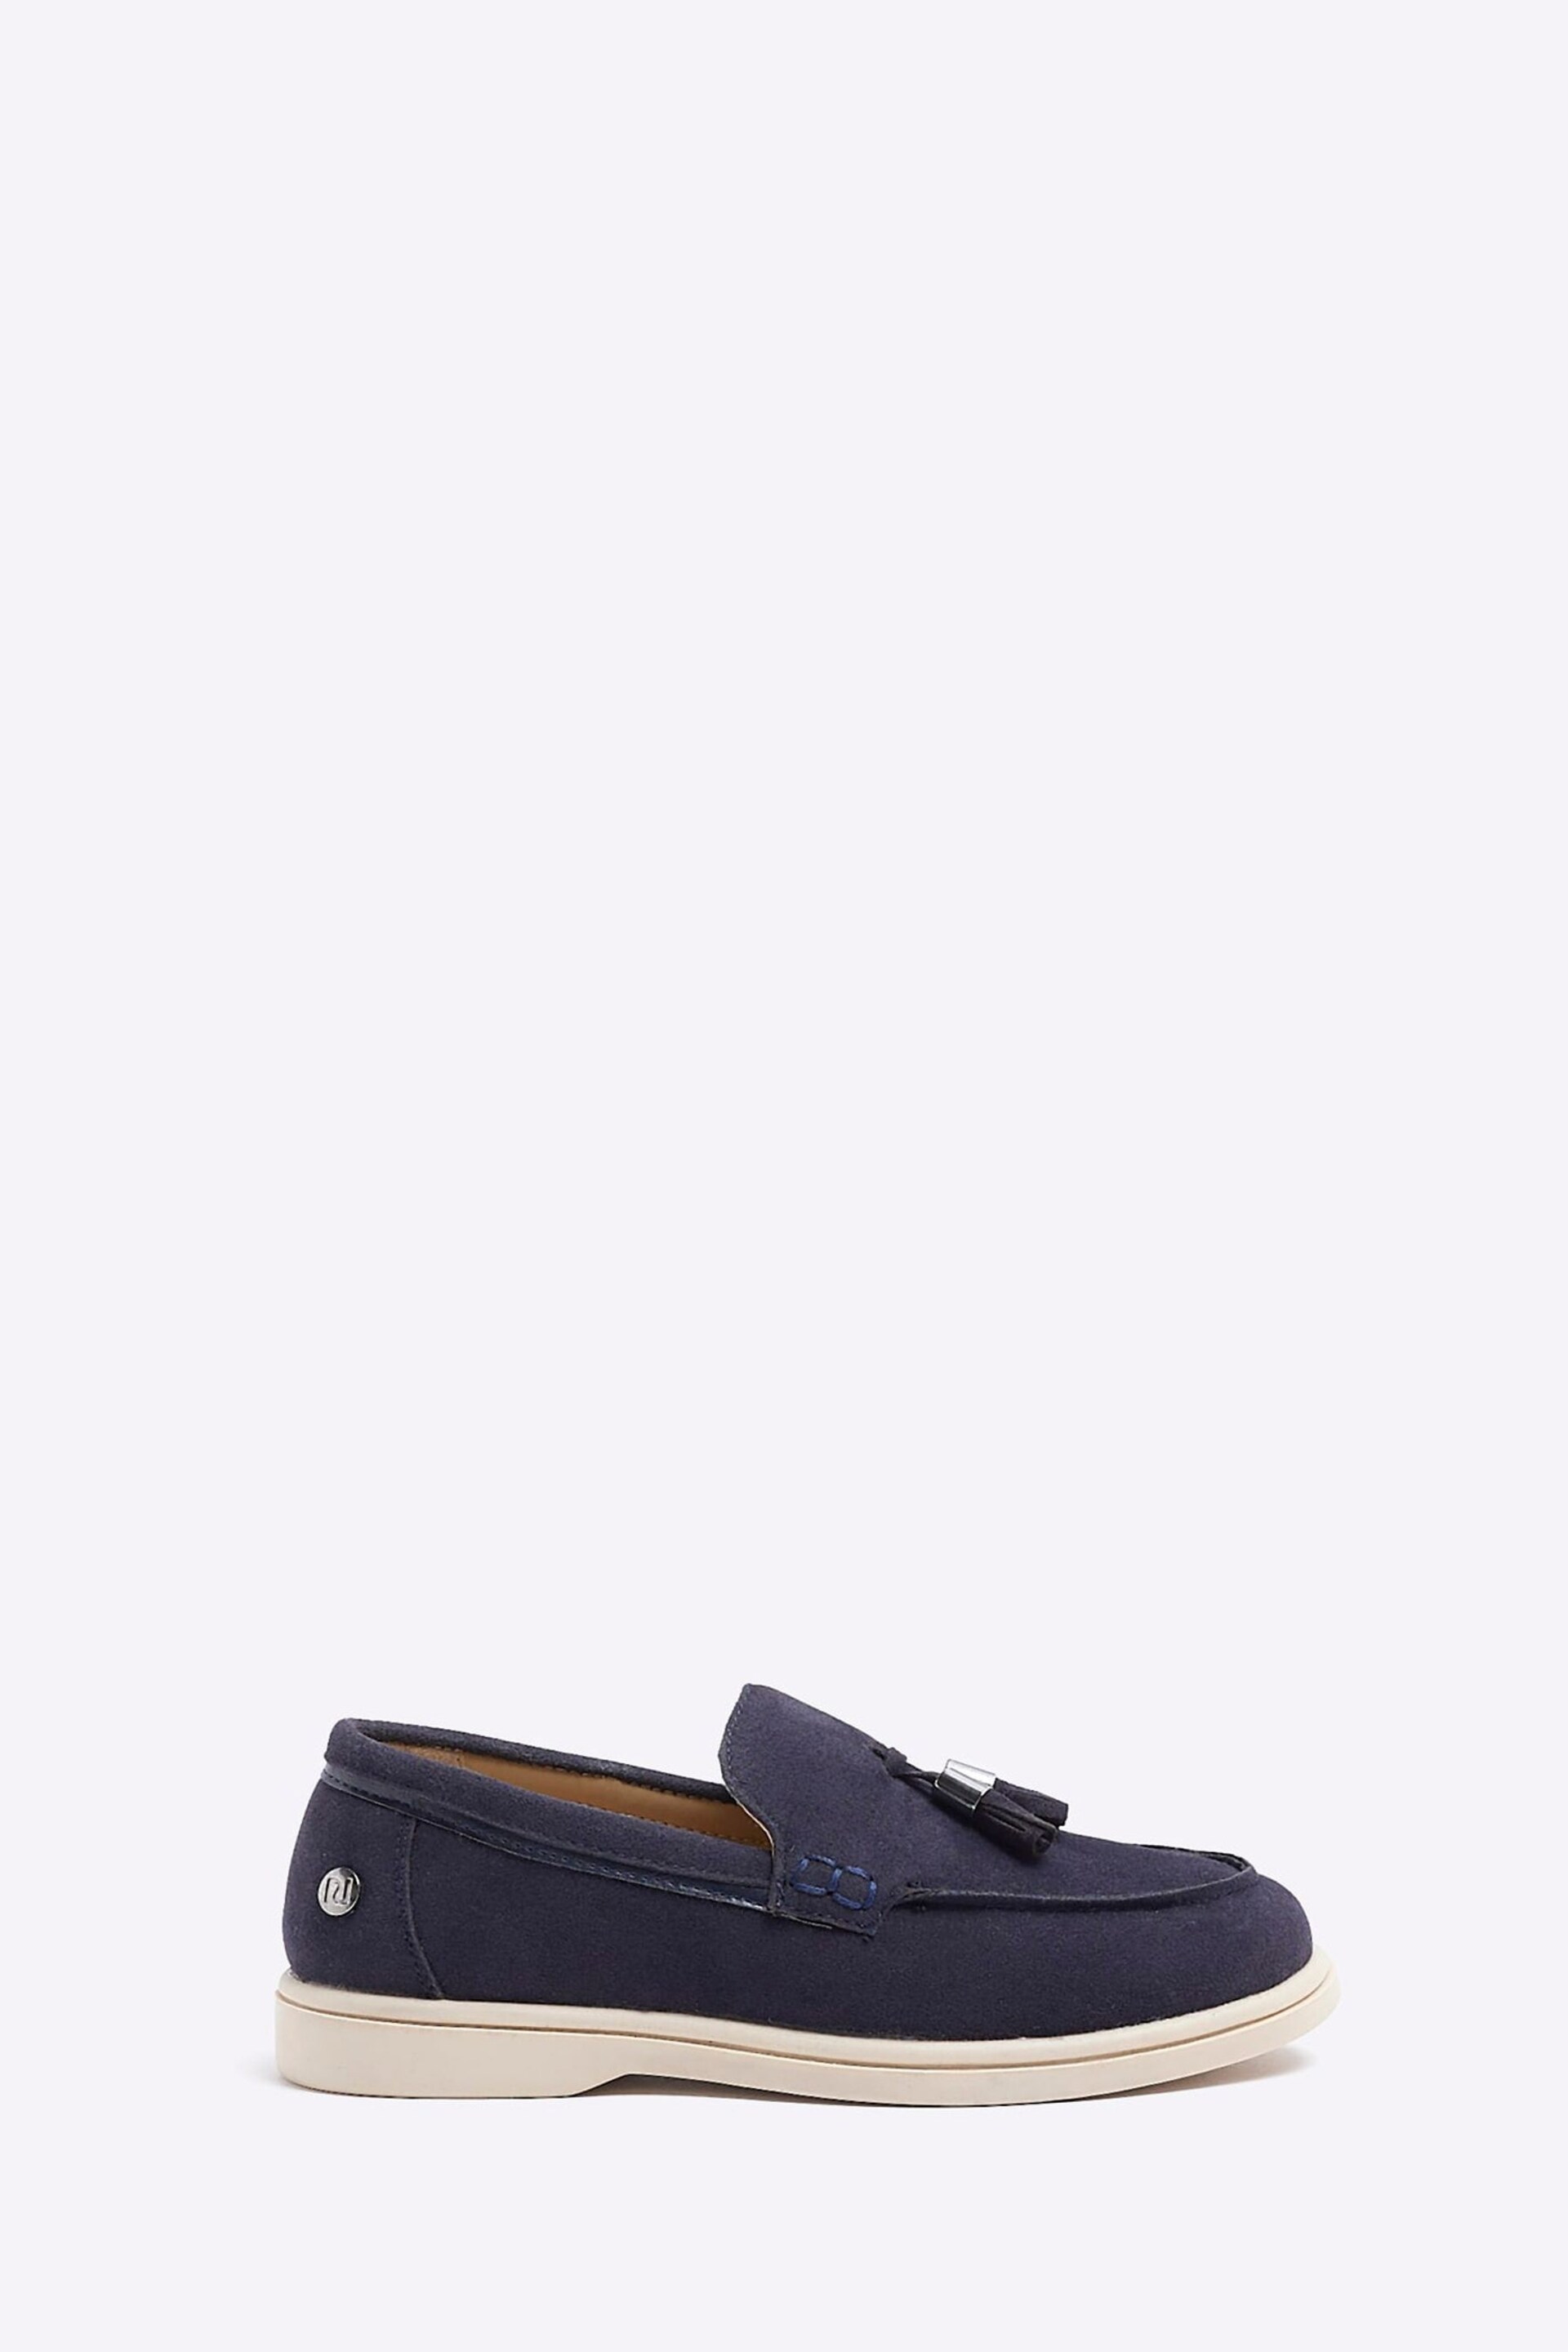 River Island Navy Blue Boys Tassel Loafers - Image 1 of 4